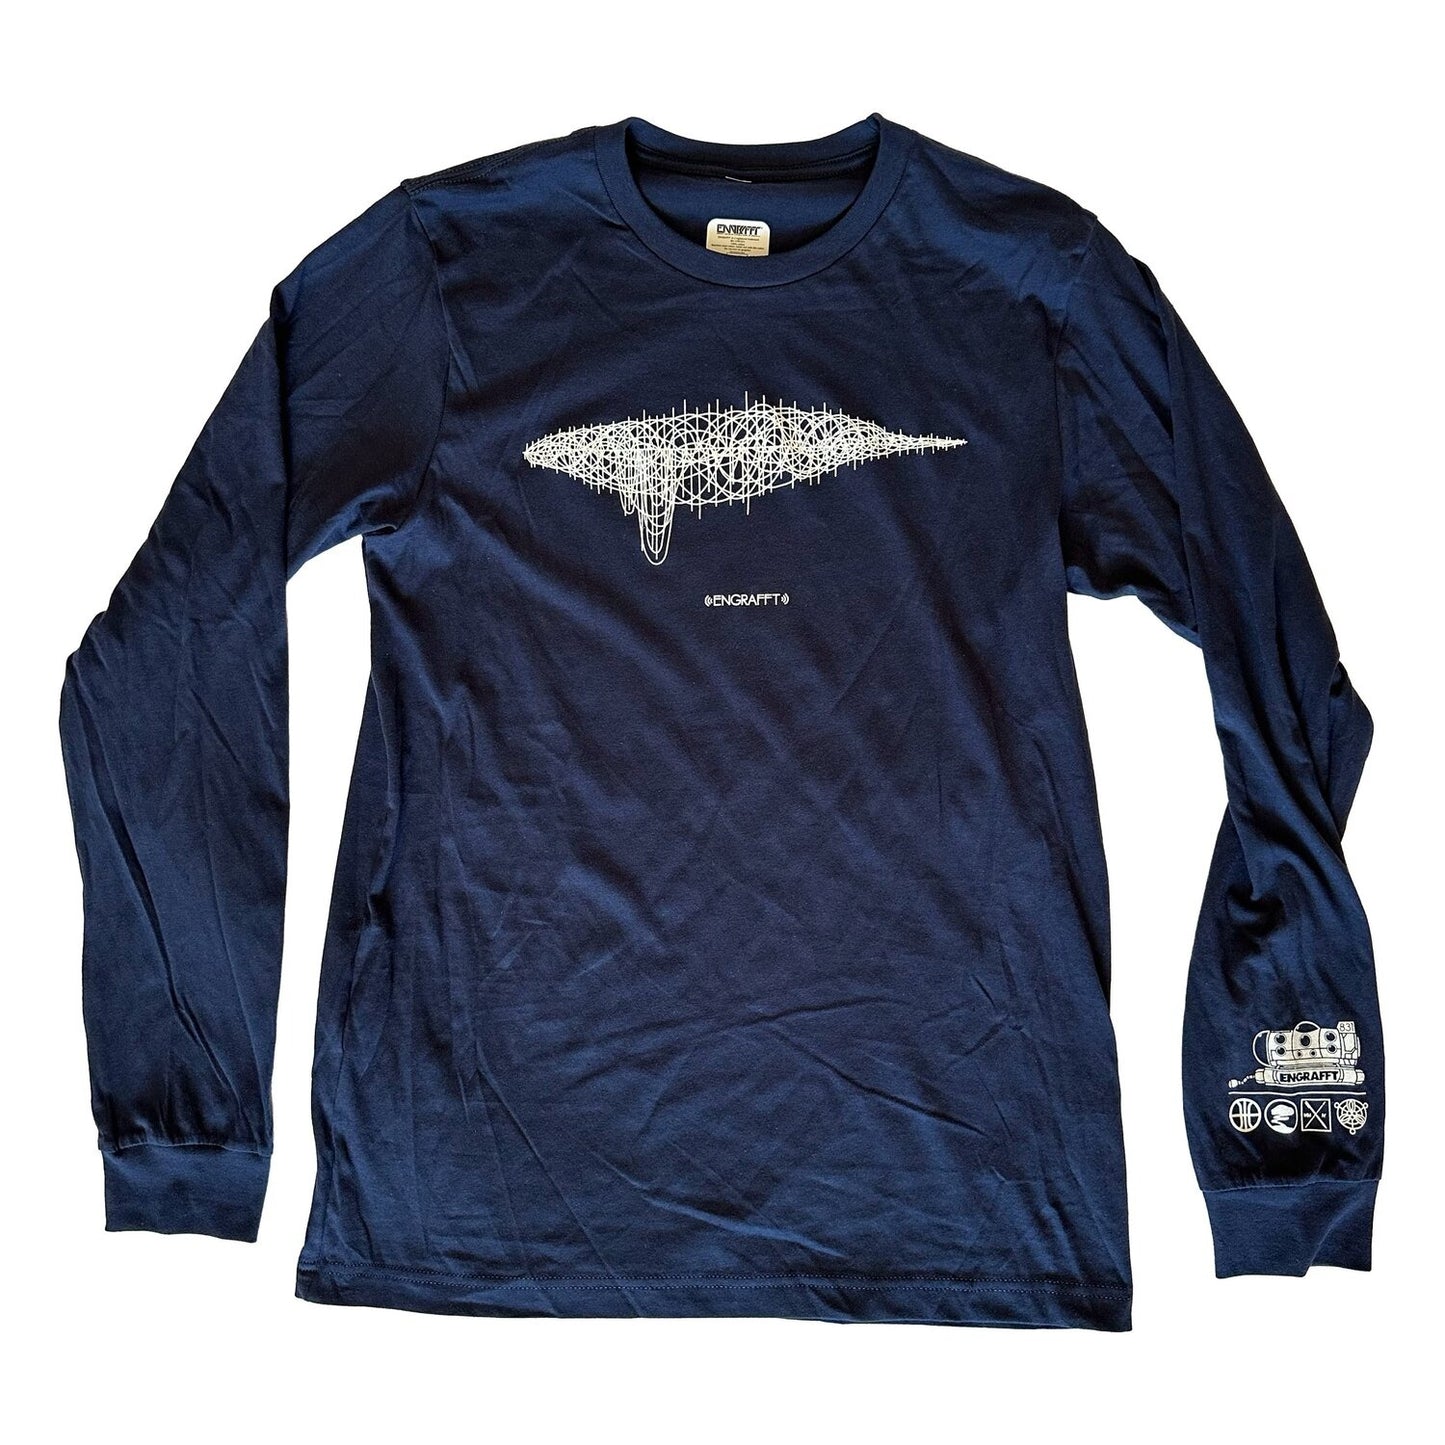 ENGRAFFT - The Whalesong Wavelength L/S Tee